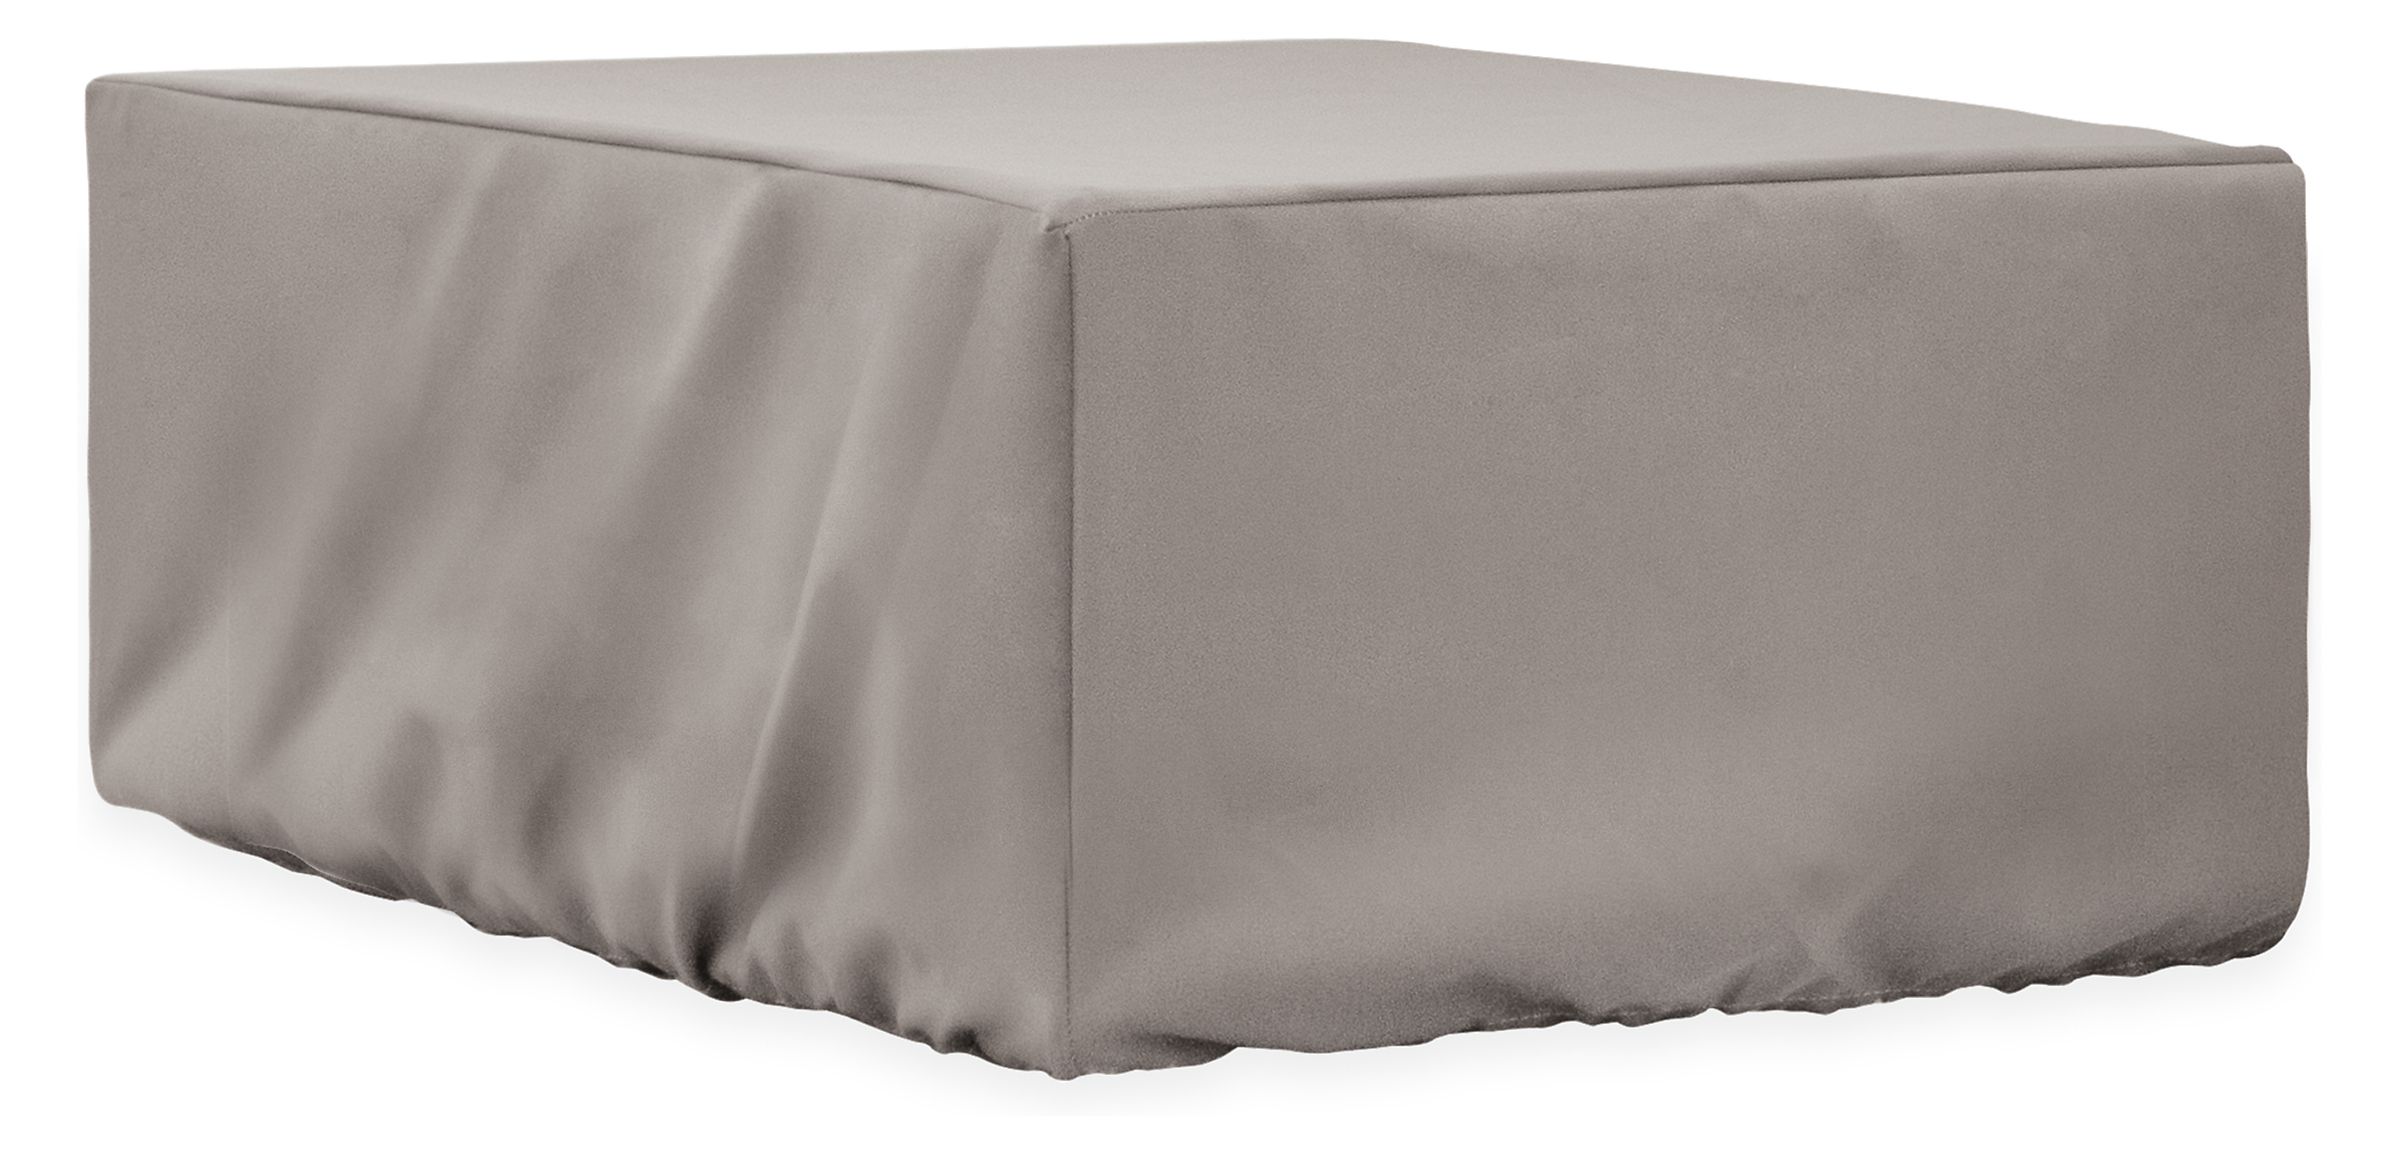 Outdoor Cover for Table 73w 31d 14h with Drawstring